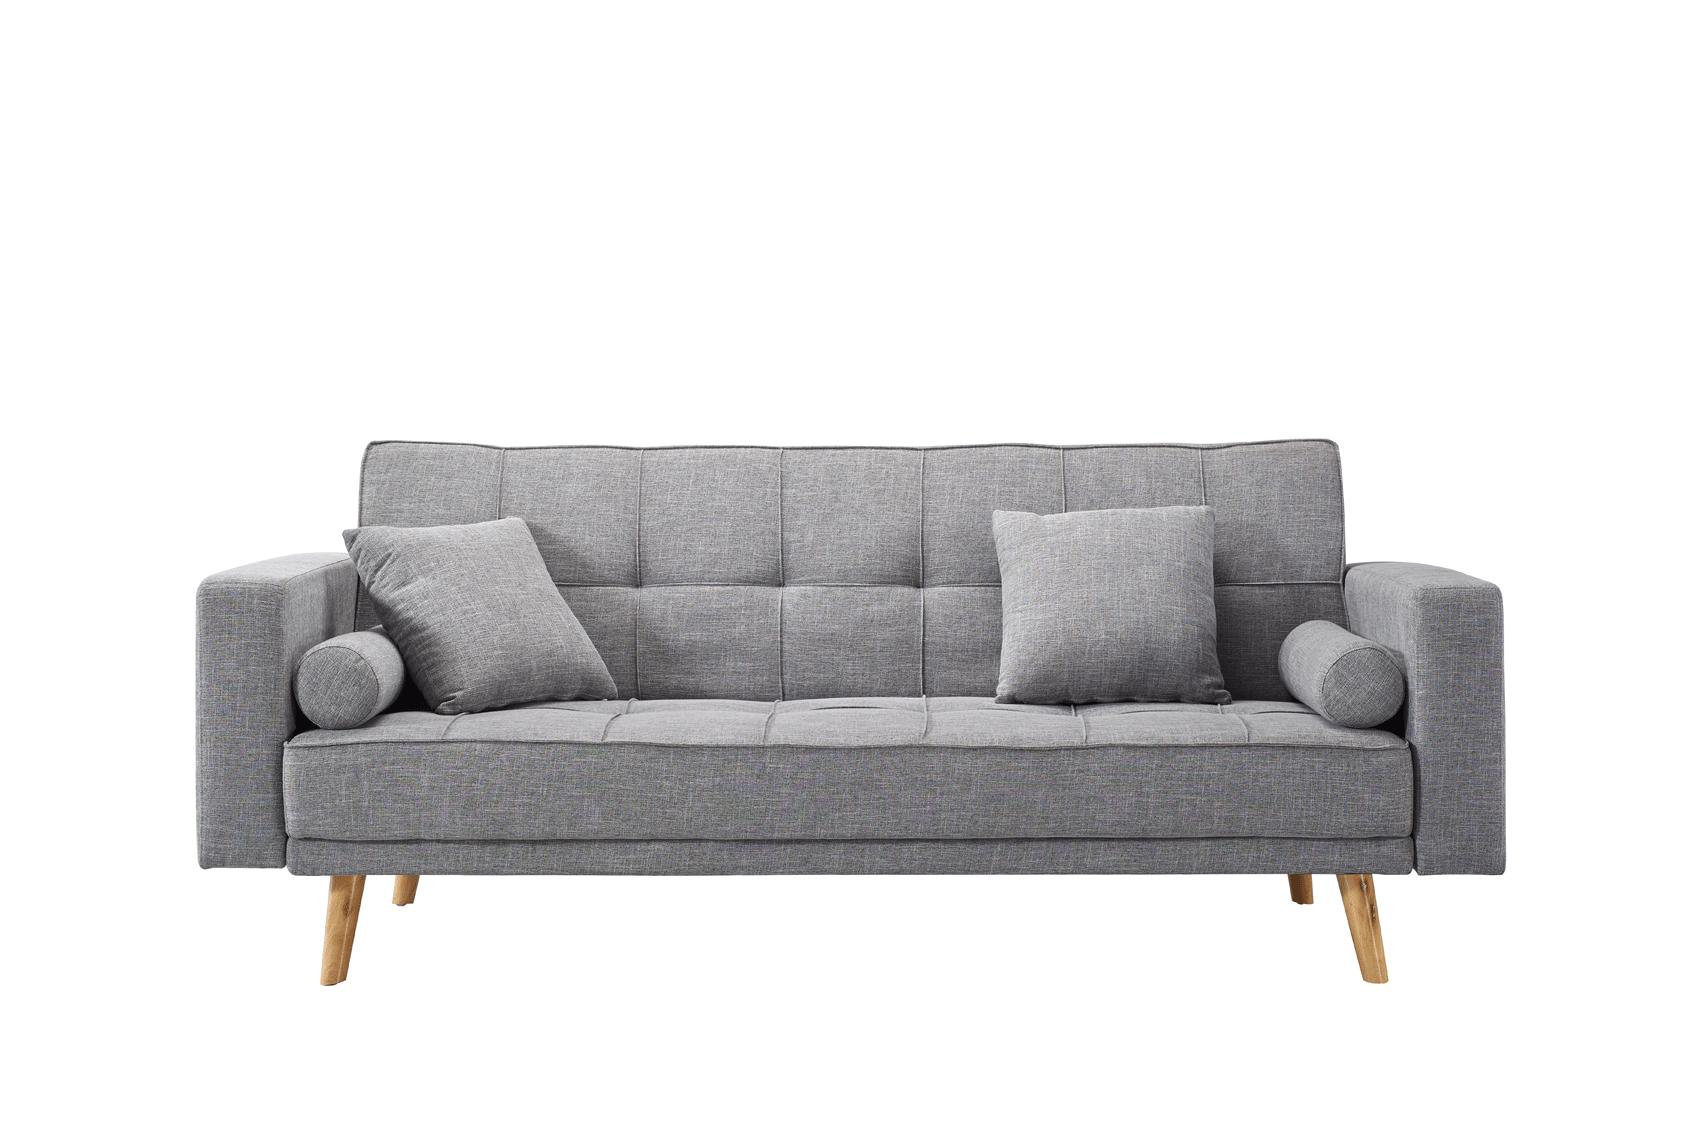 

    
Contemporary Grey Fabric 3 Seat Sofa-bed Modern Chic ESF 116
